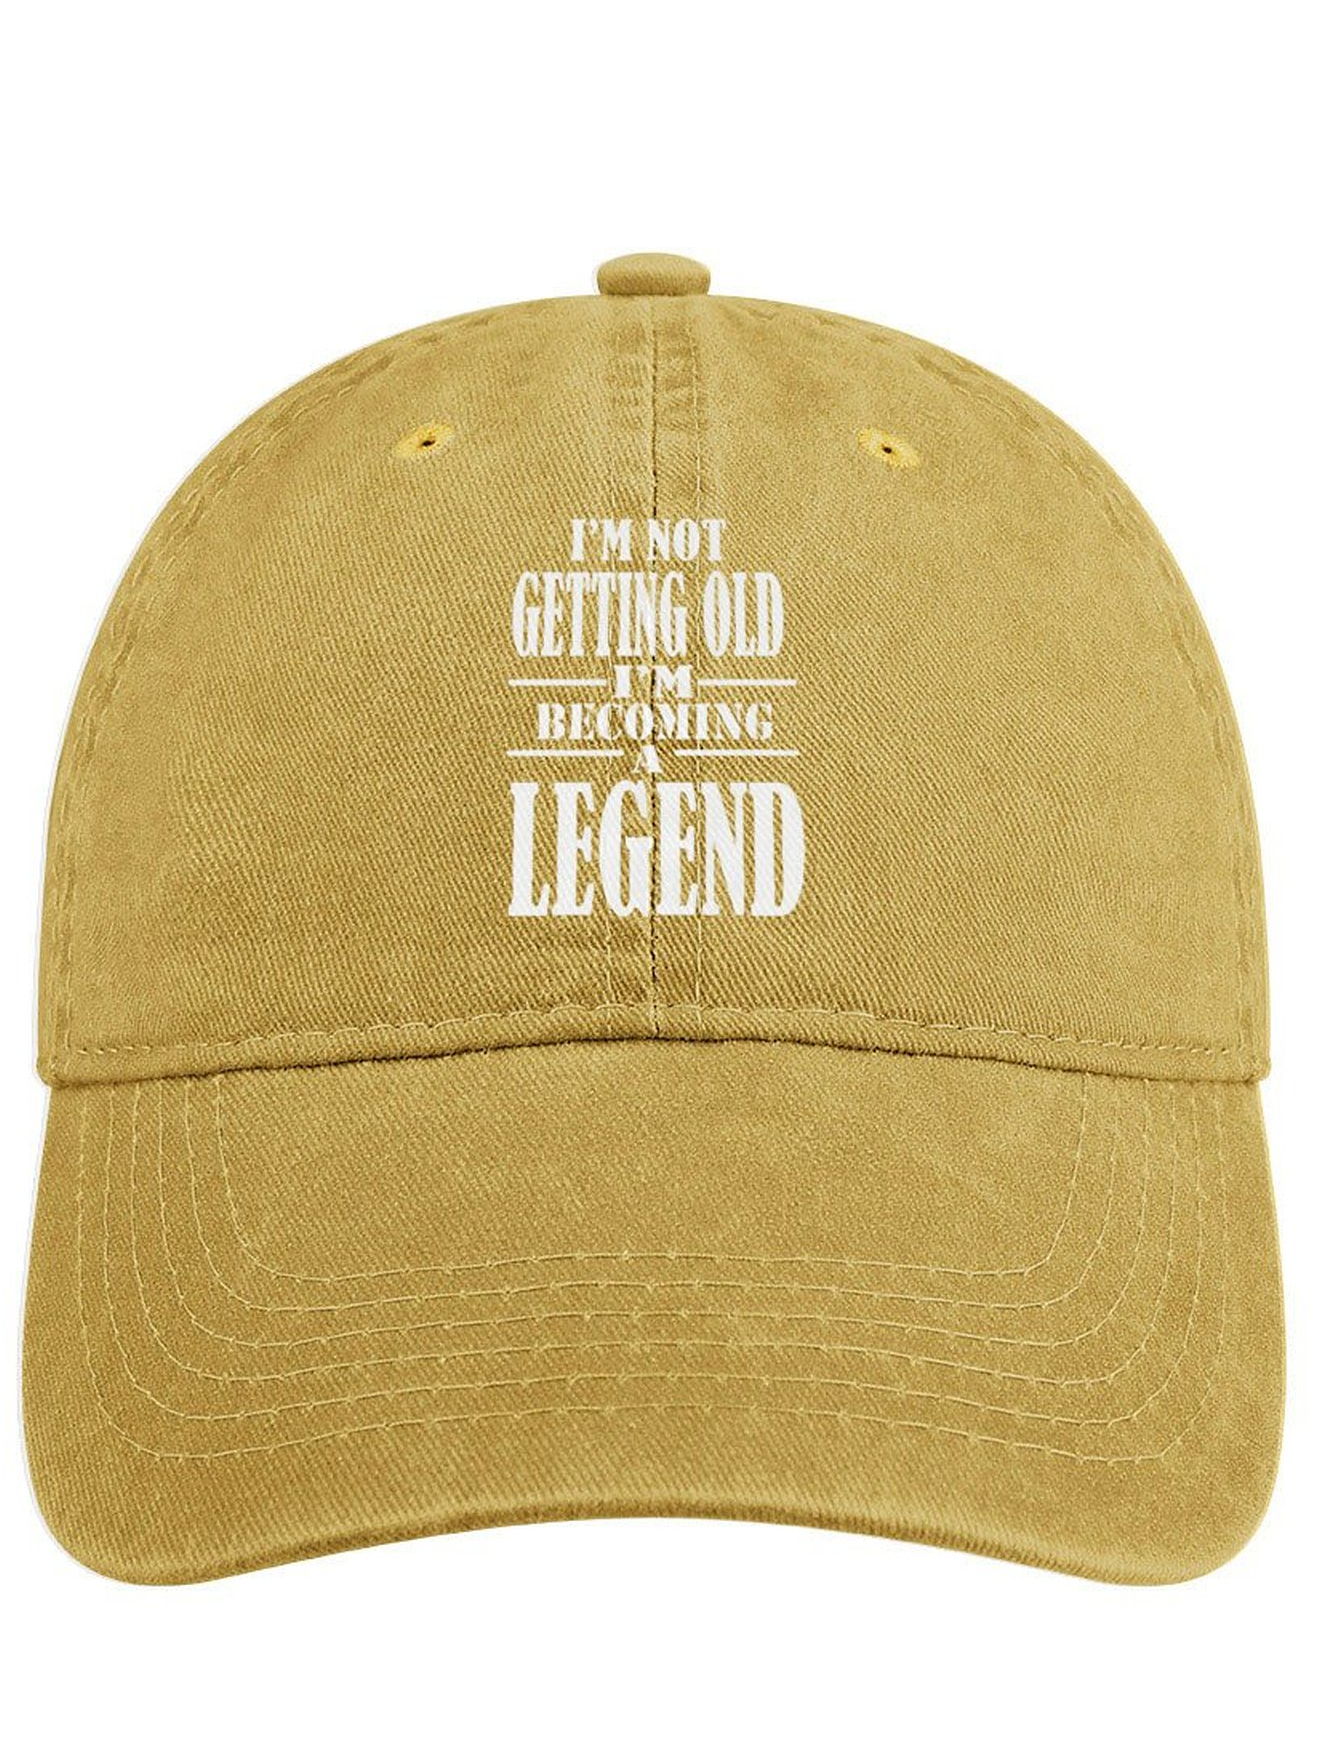 Men's /Women's 'm not getting old I'm becoming a legend  Denim Hat